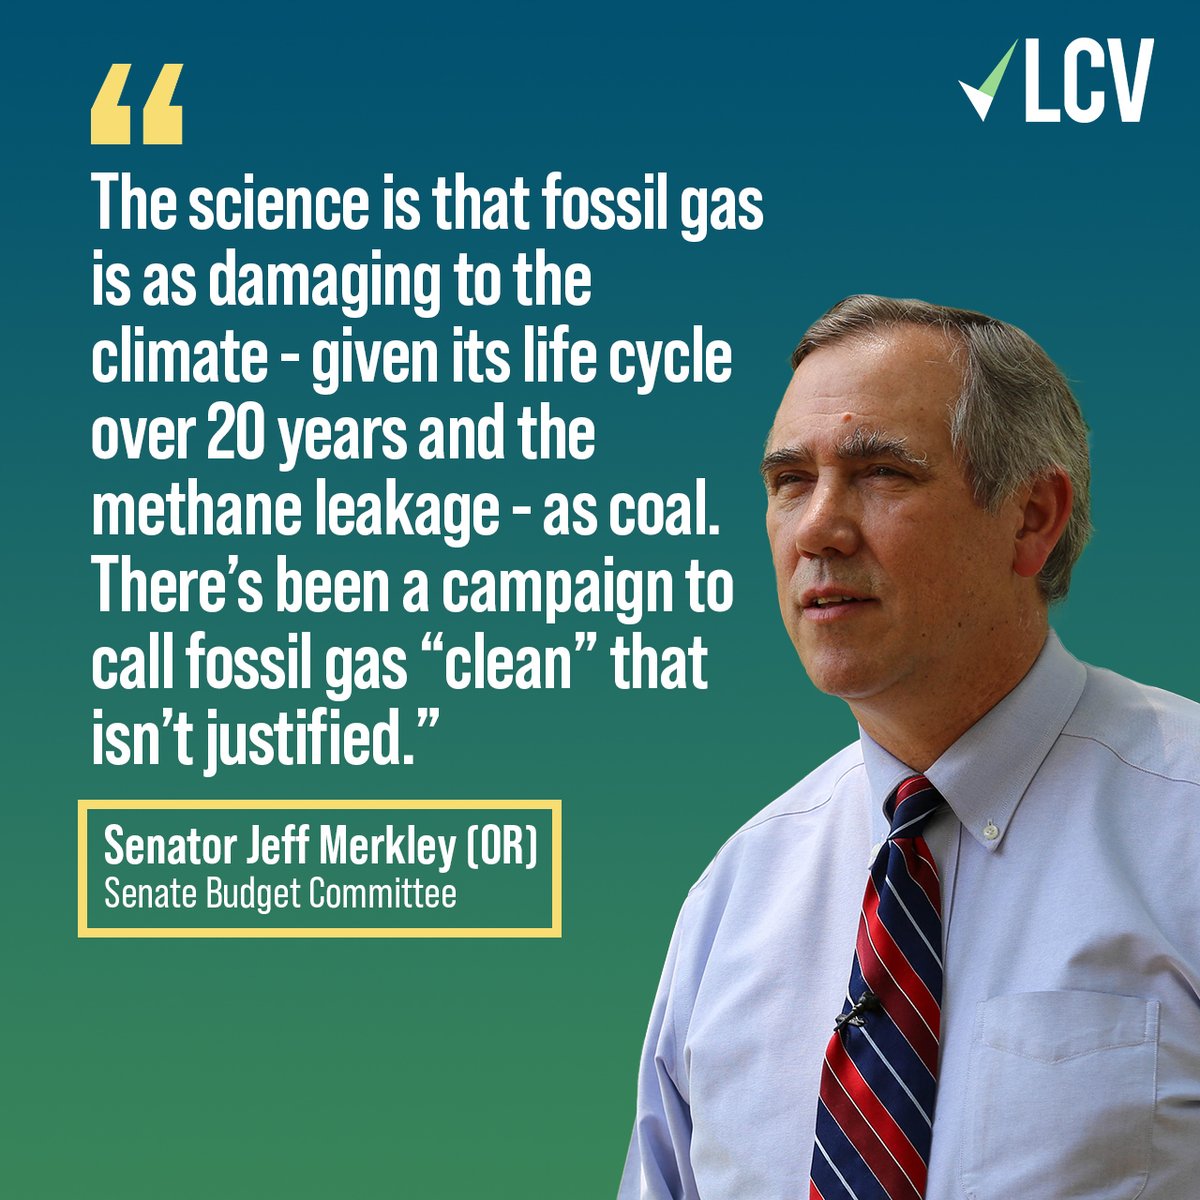 @SenJeffMerkley pushed back on the fossil fuel industry’s misinformation campaign to label liquefied fossil gas as “clean.”

The reality is, it’s just as bad - or even worse - for our climate and communities than coal. #StopLNG